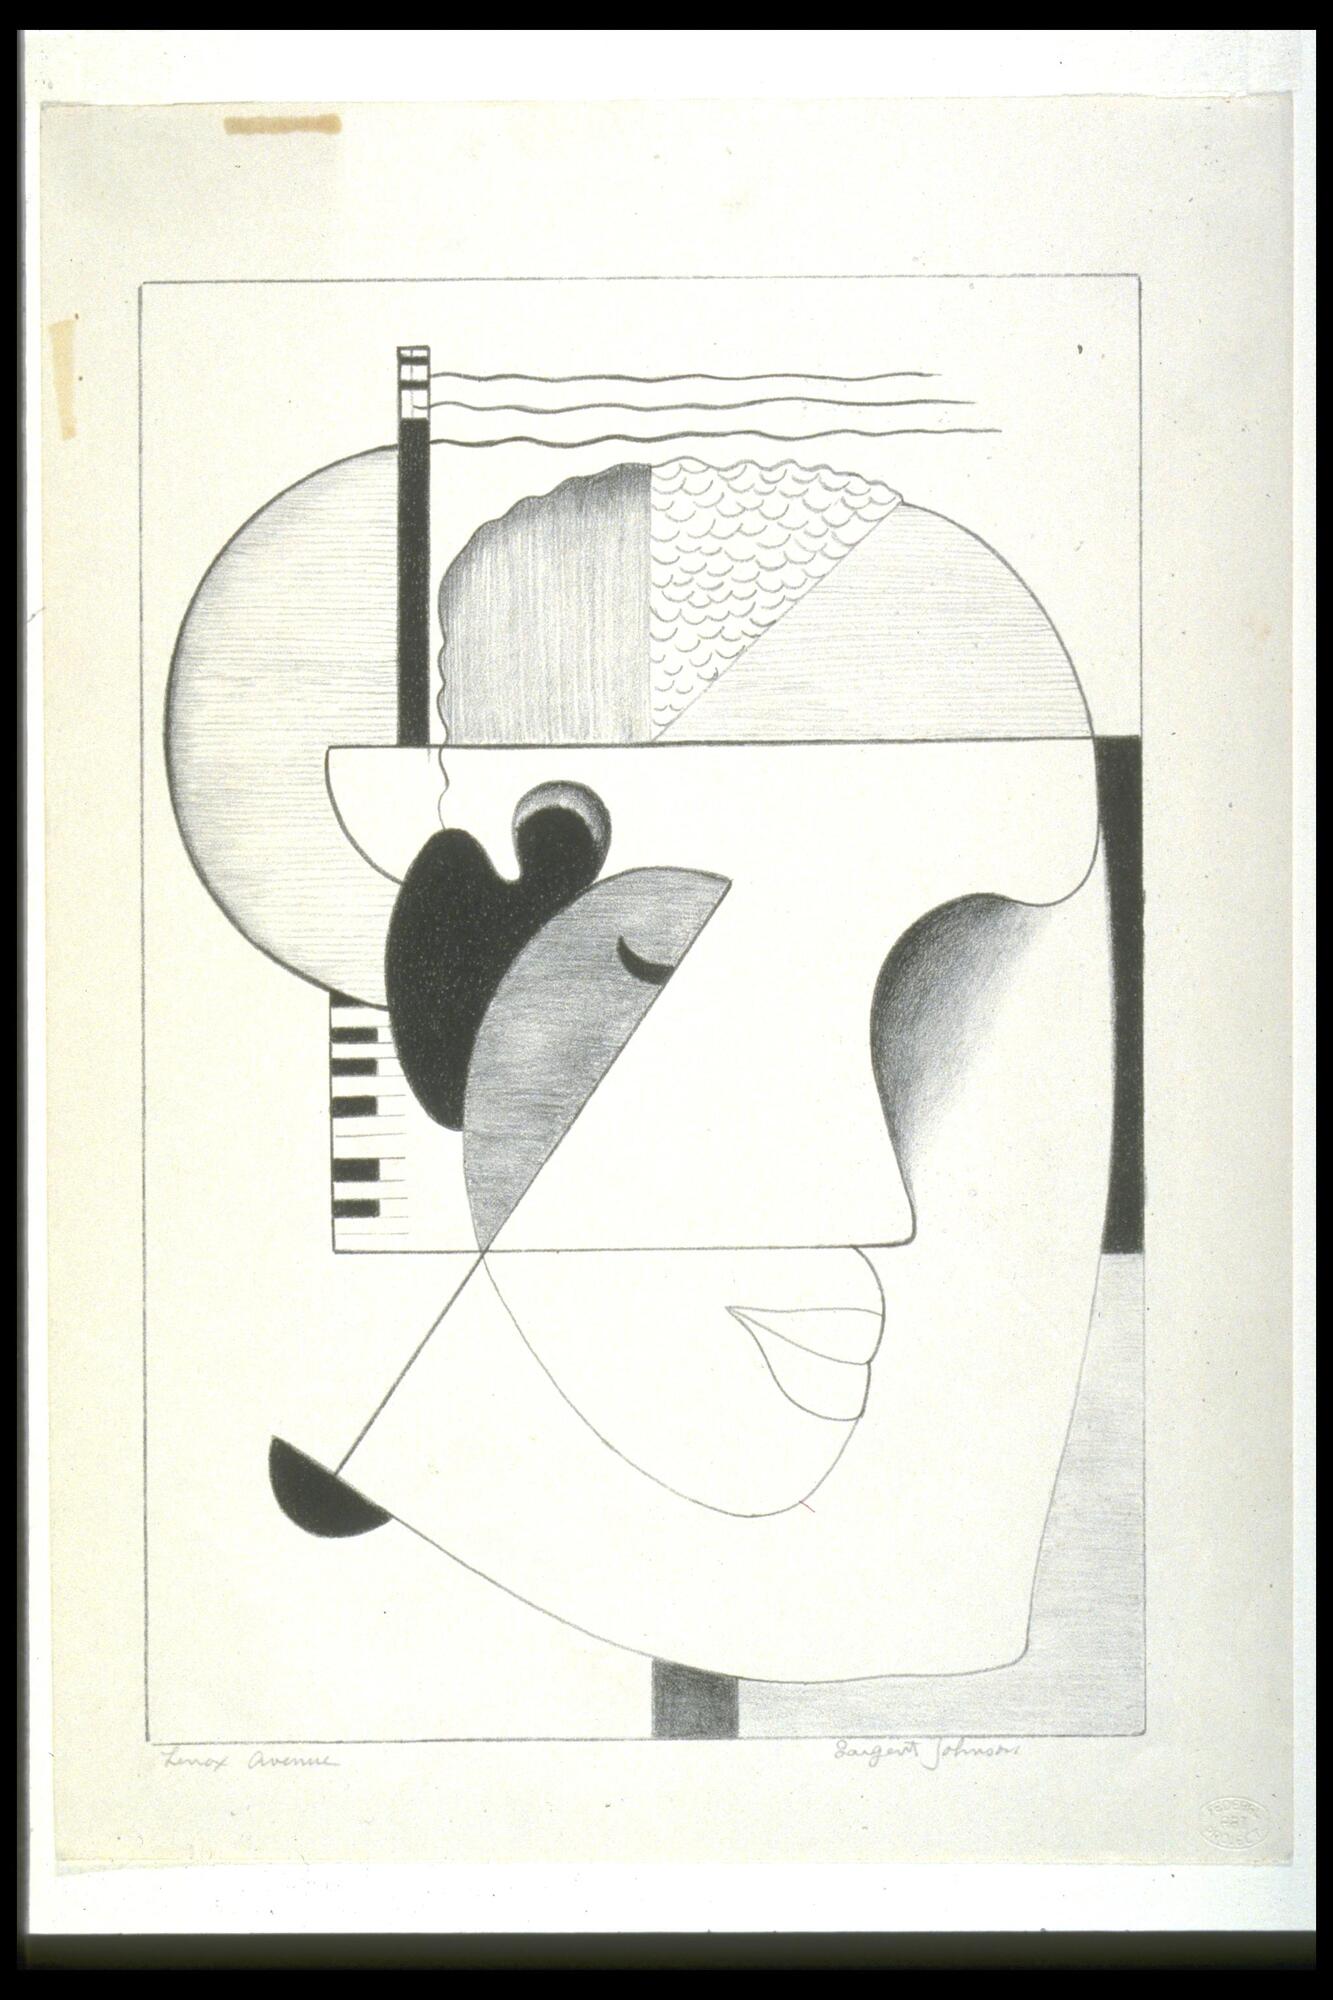 This is an abstract face of a figure looking to the right. The head is divided into compartments of varying textures by several straight lines. There are piano keys are on the left side of the head, and a cigarette at top left.&nbsp;